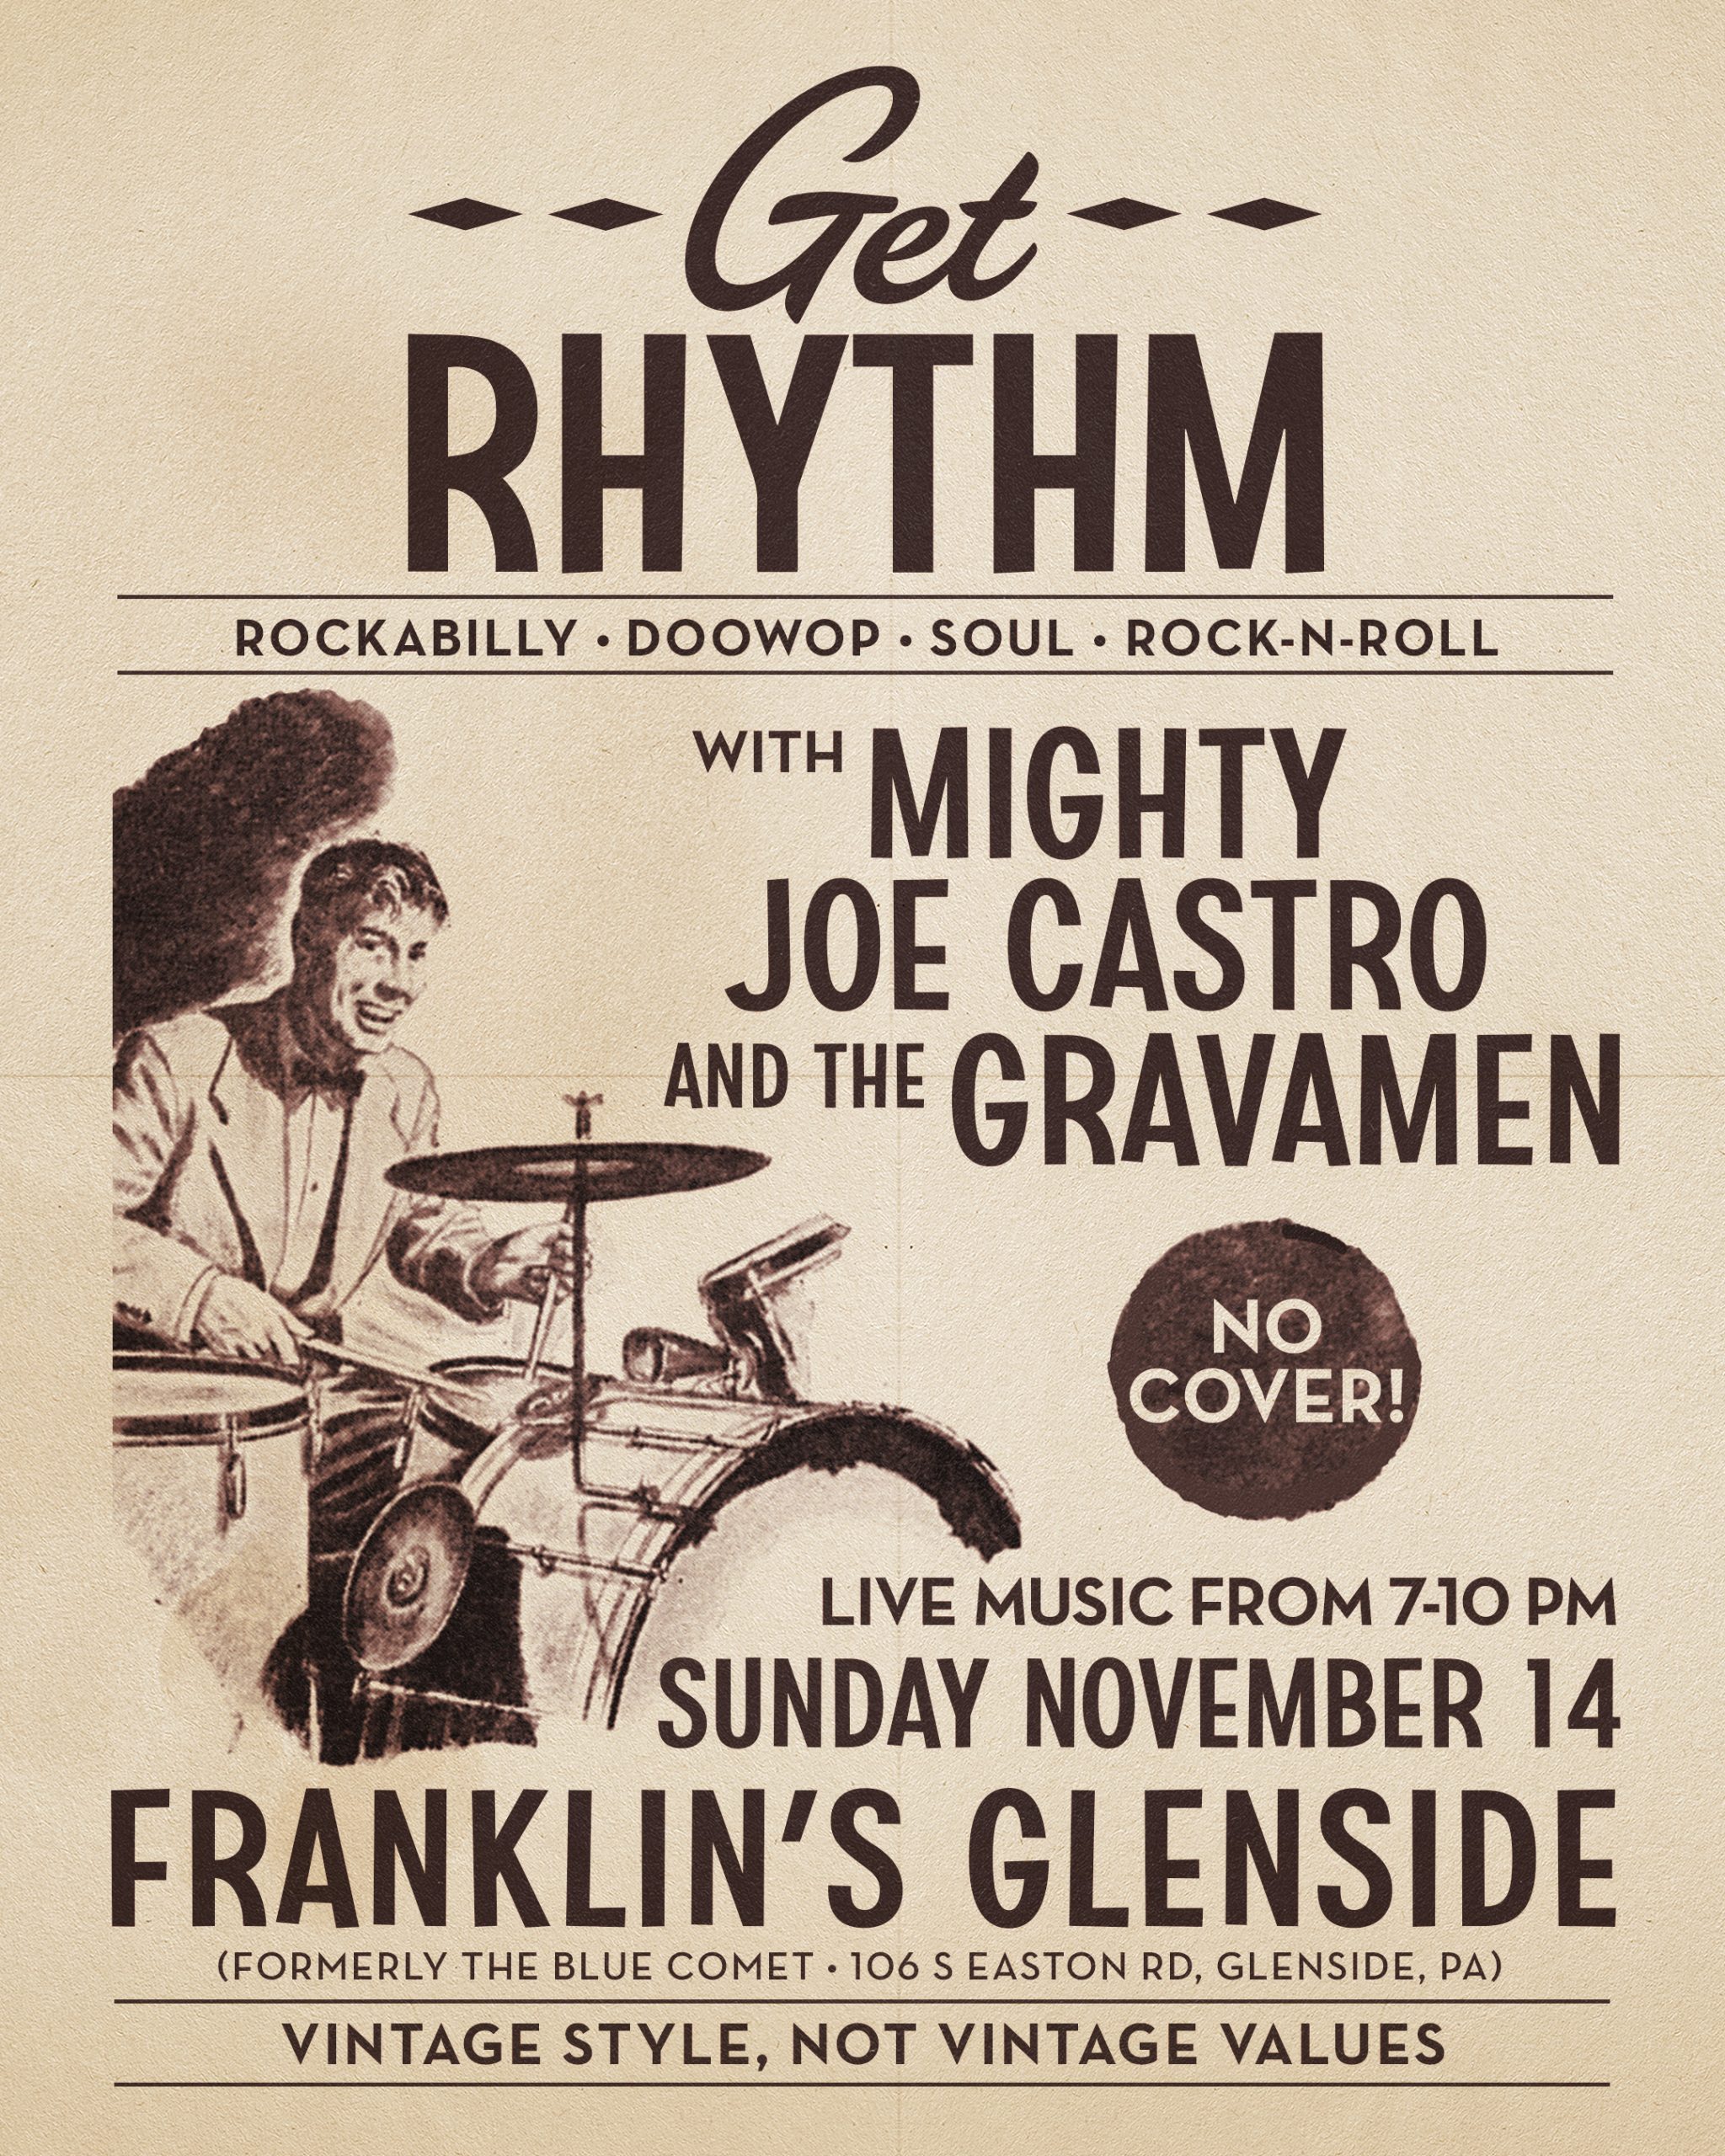 Mighty Joe Castro and the Gravamen perform rockabilly music at Franklins in Glenside PA